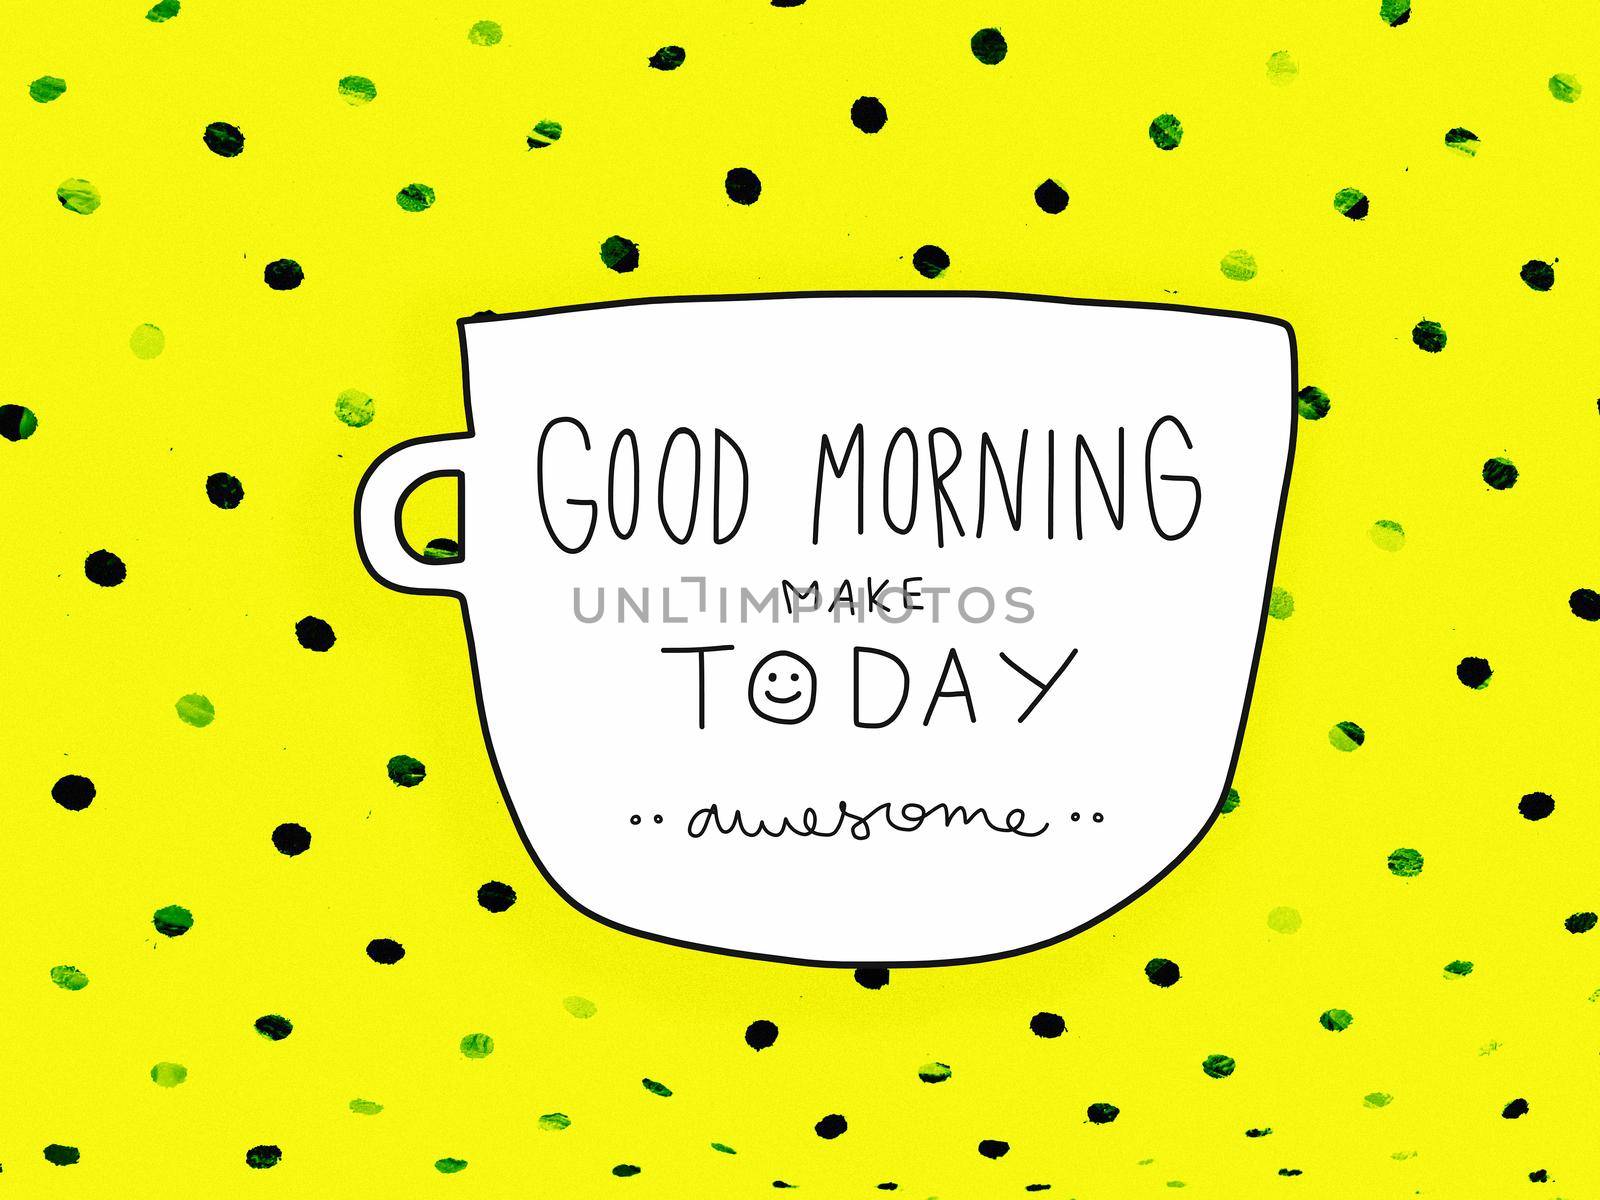 Good morning make today awesome word on white cup cartoon on yellow polka dot background illustration by Yoopho